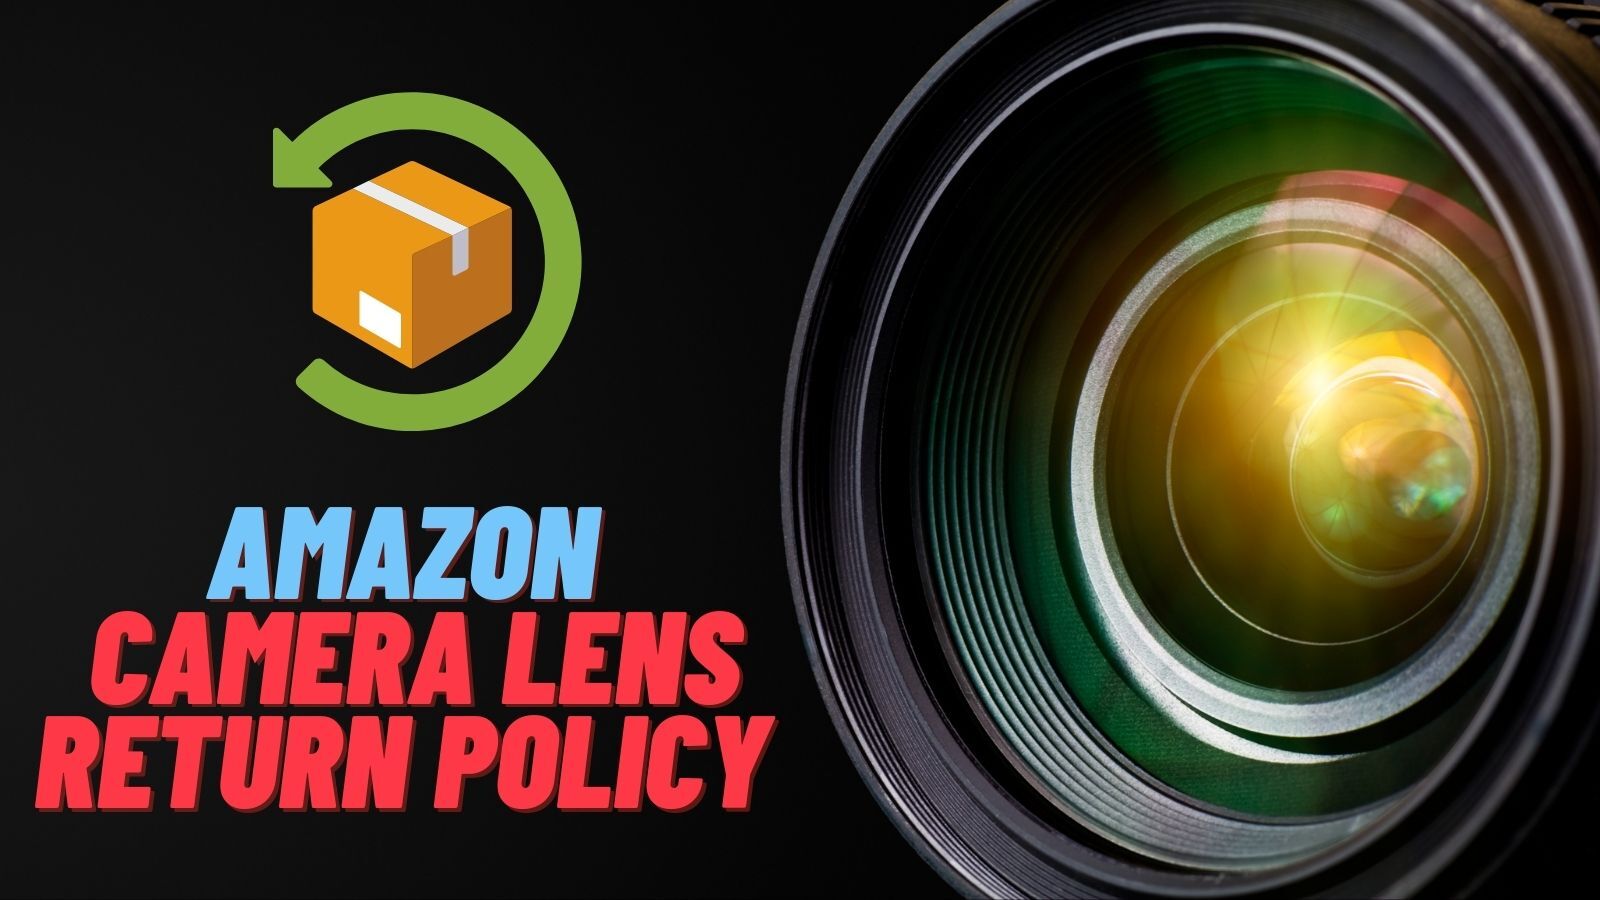 Amazon Camera Lens Return Policy (Everything You Need to Know!)